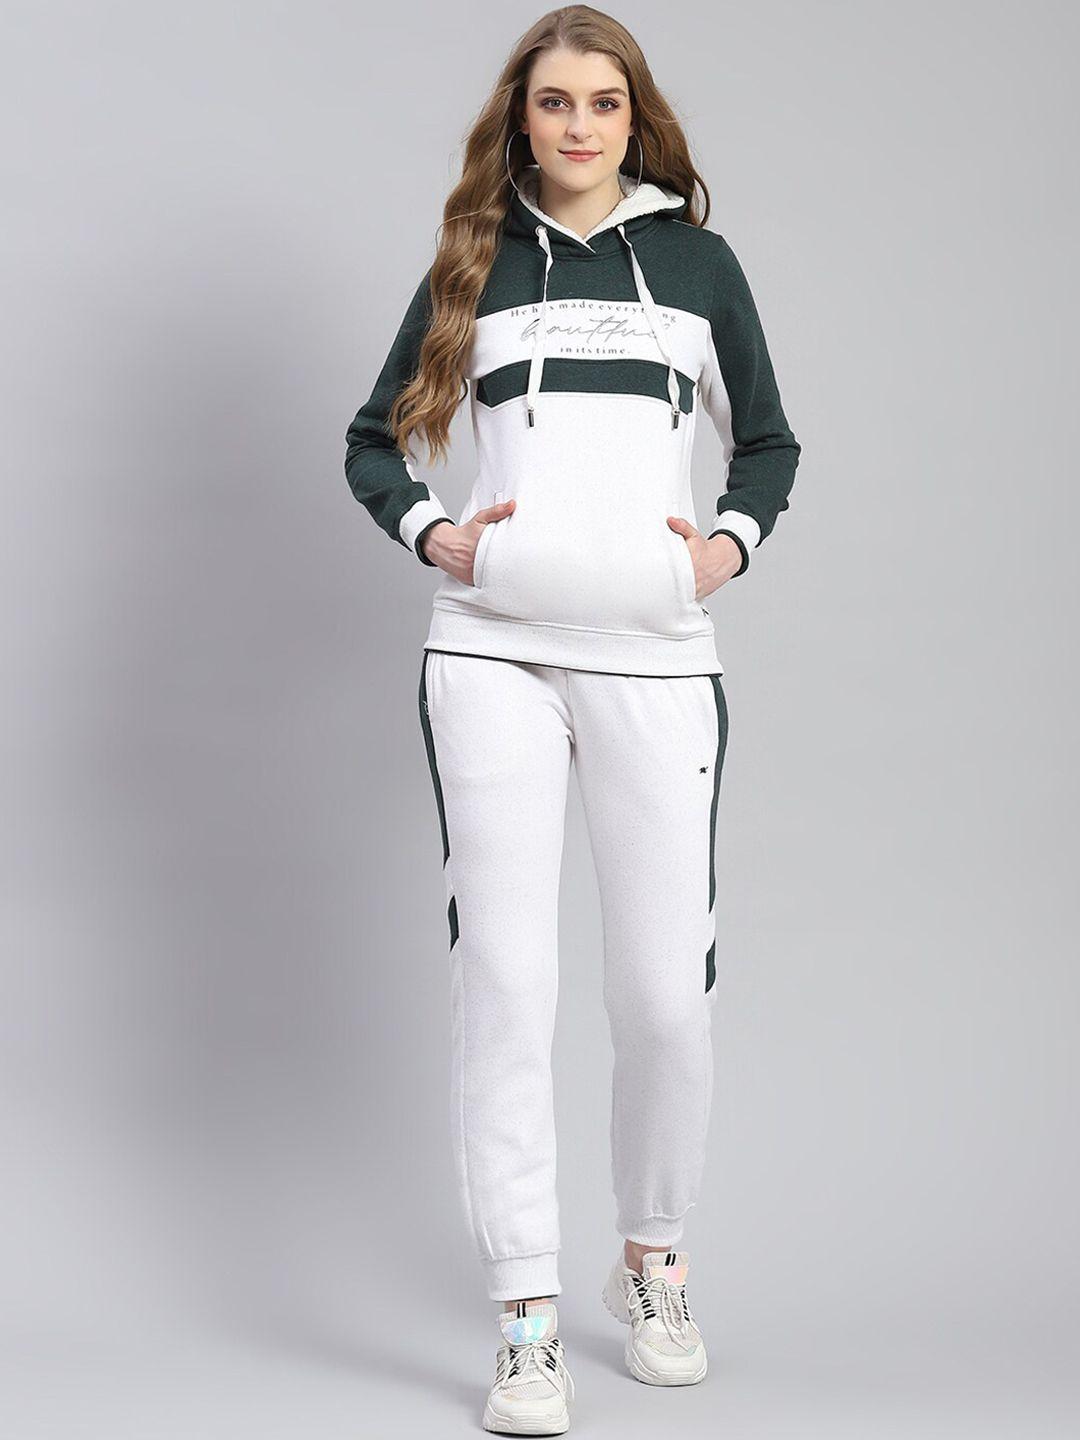 monte carlo colourblocked hooded tracksuit